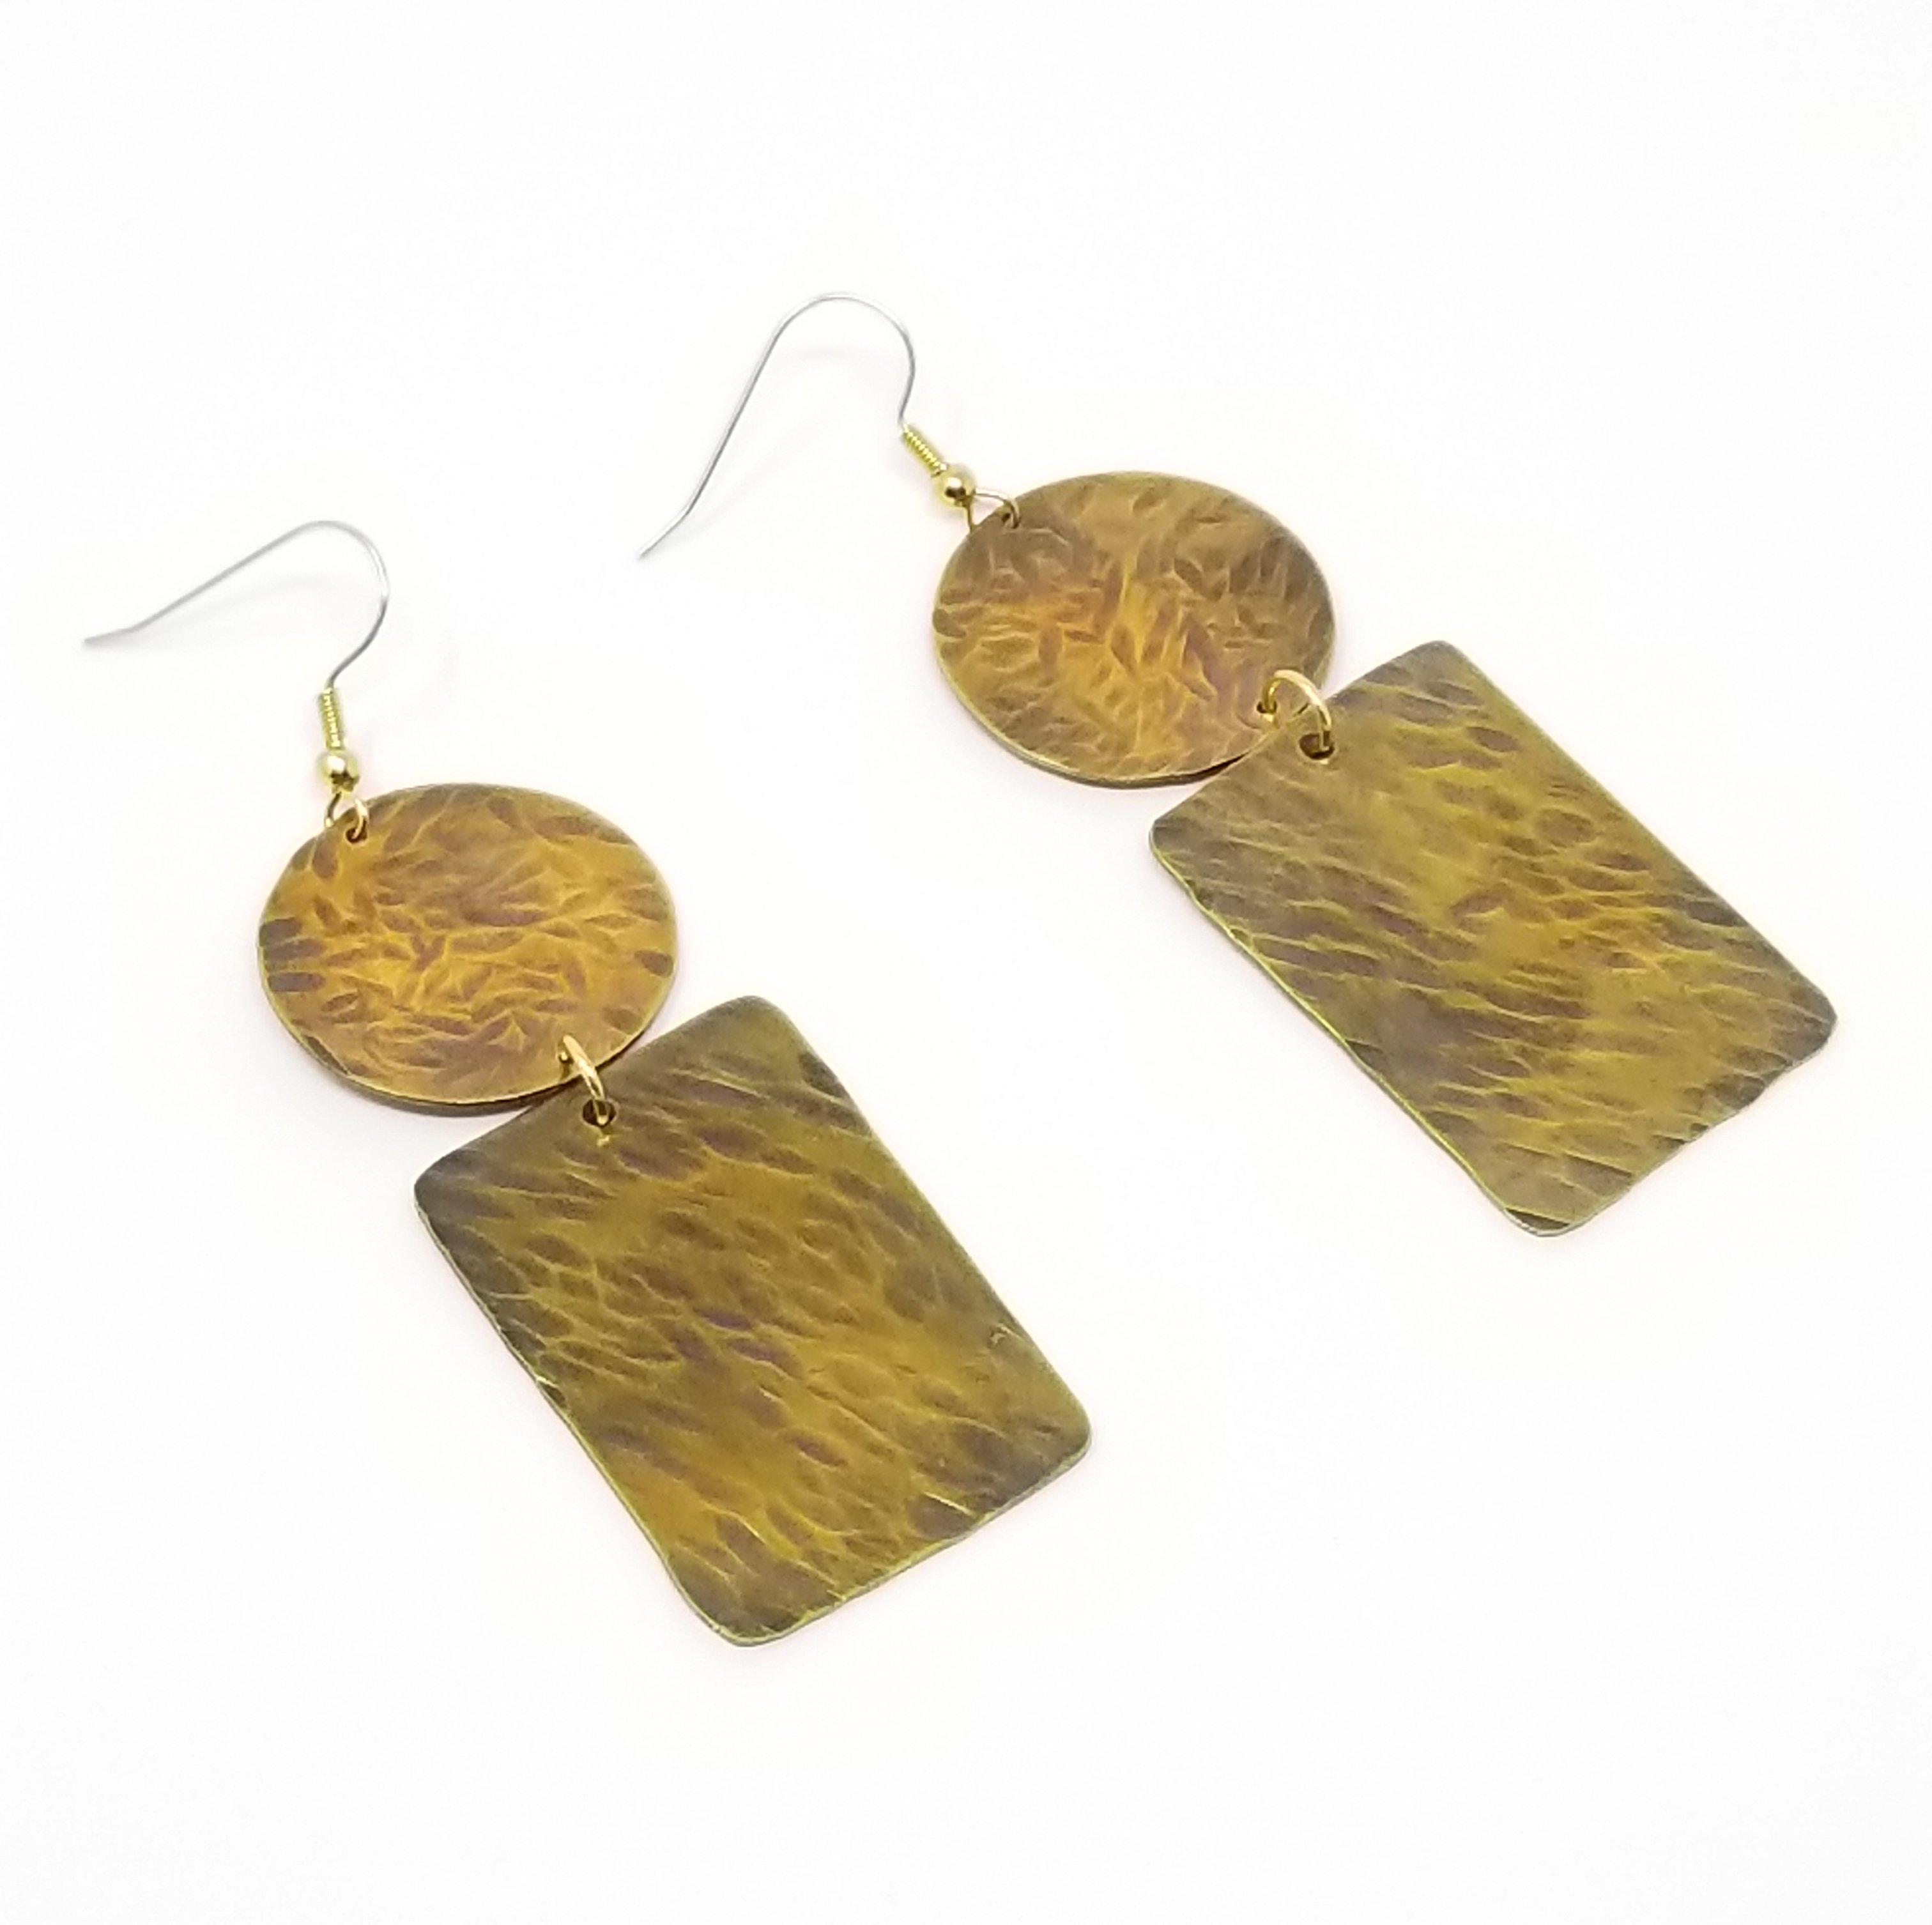 Phoebe - Recycled Brass Textured Geometric Earrings